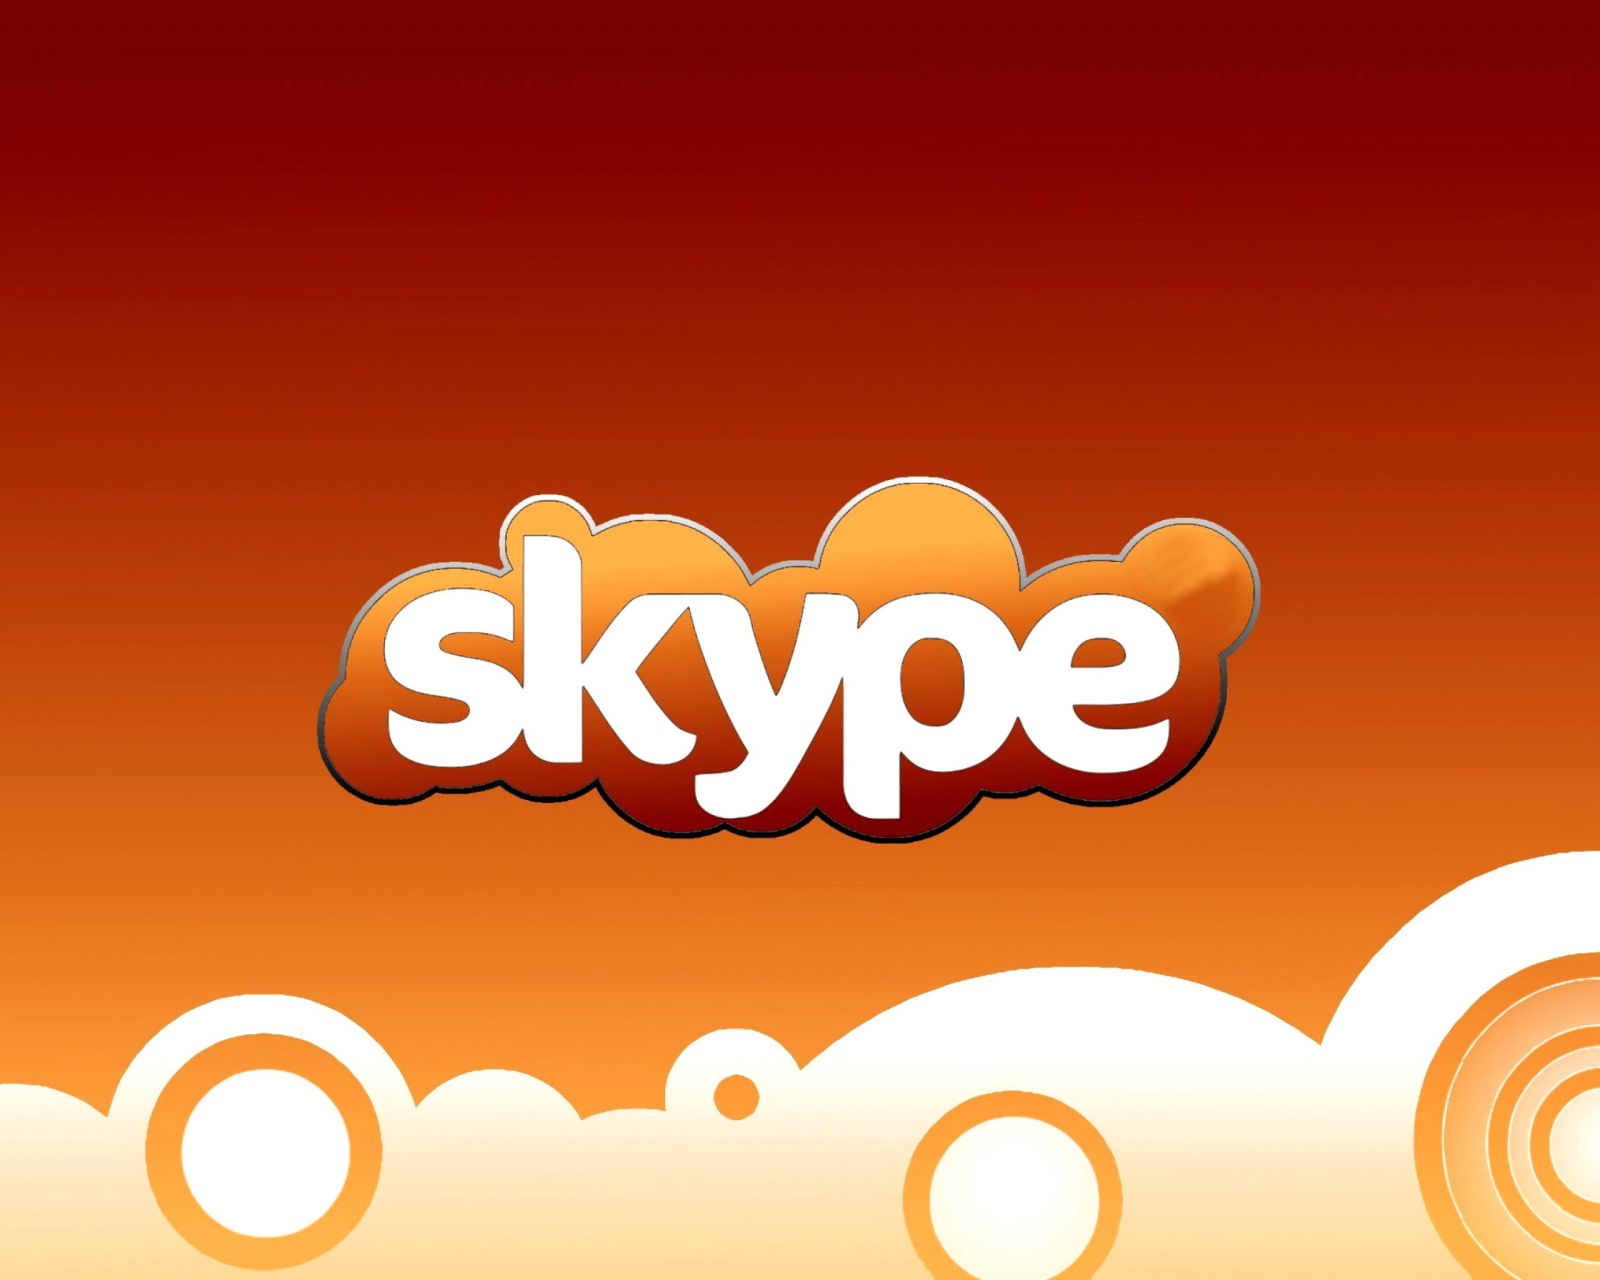 Skype for calls and chat wallpaper 1600x1280